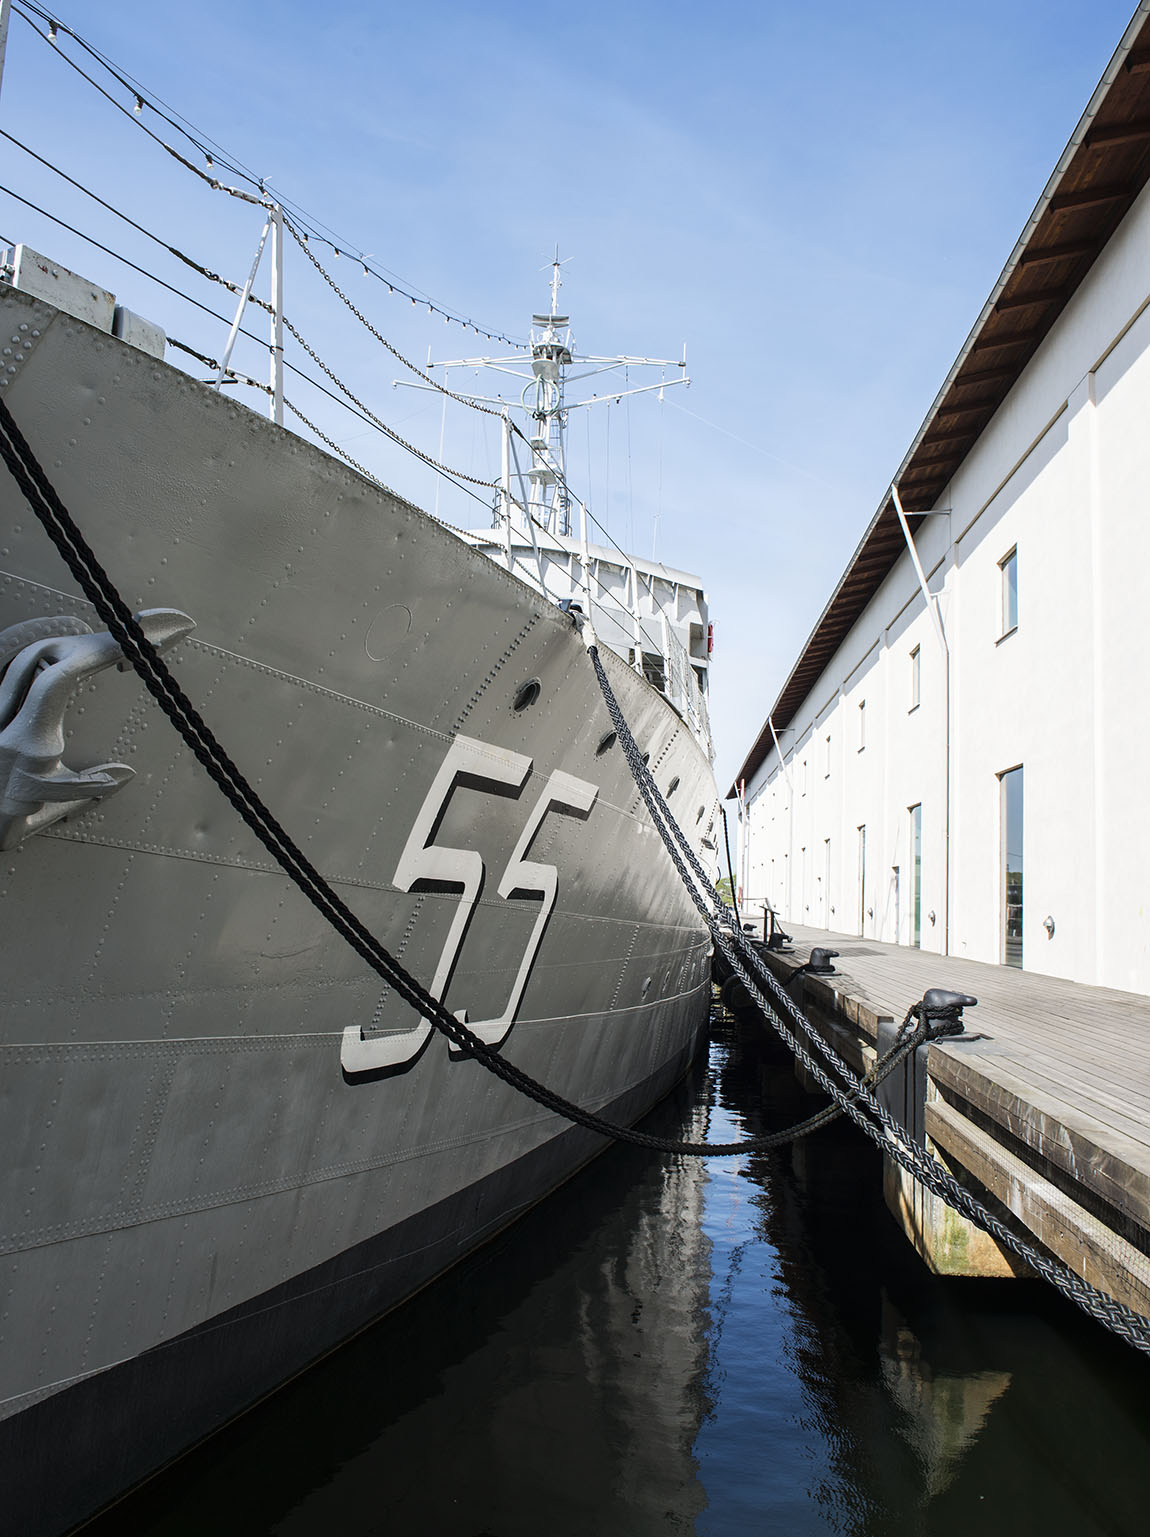 The Naval Museum (Marinmuseum) in Karlskrona: Historic battles and present times displayed at naval museum